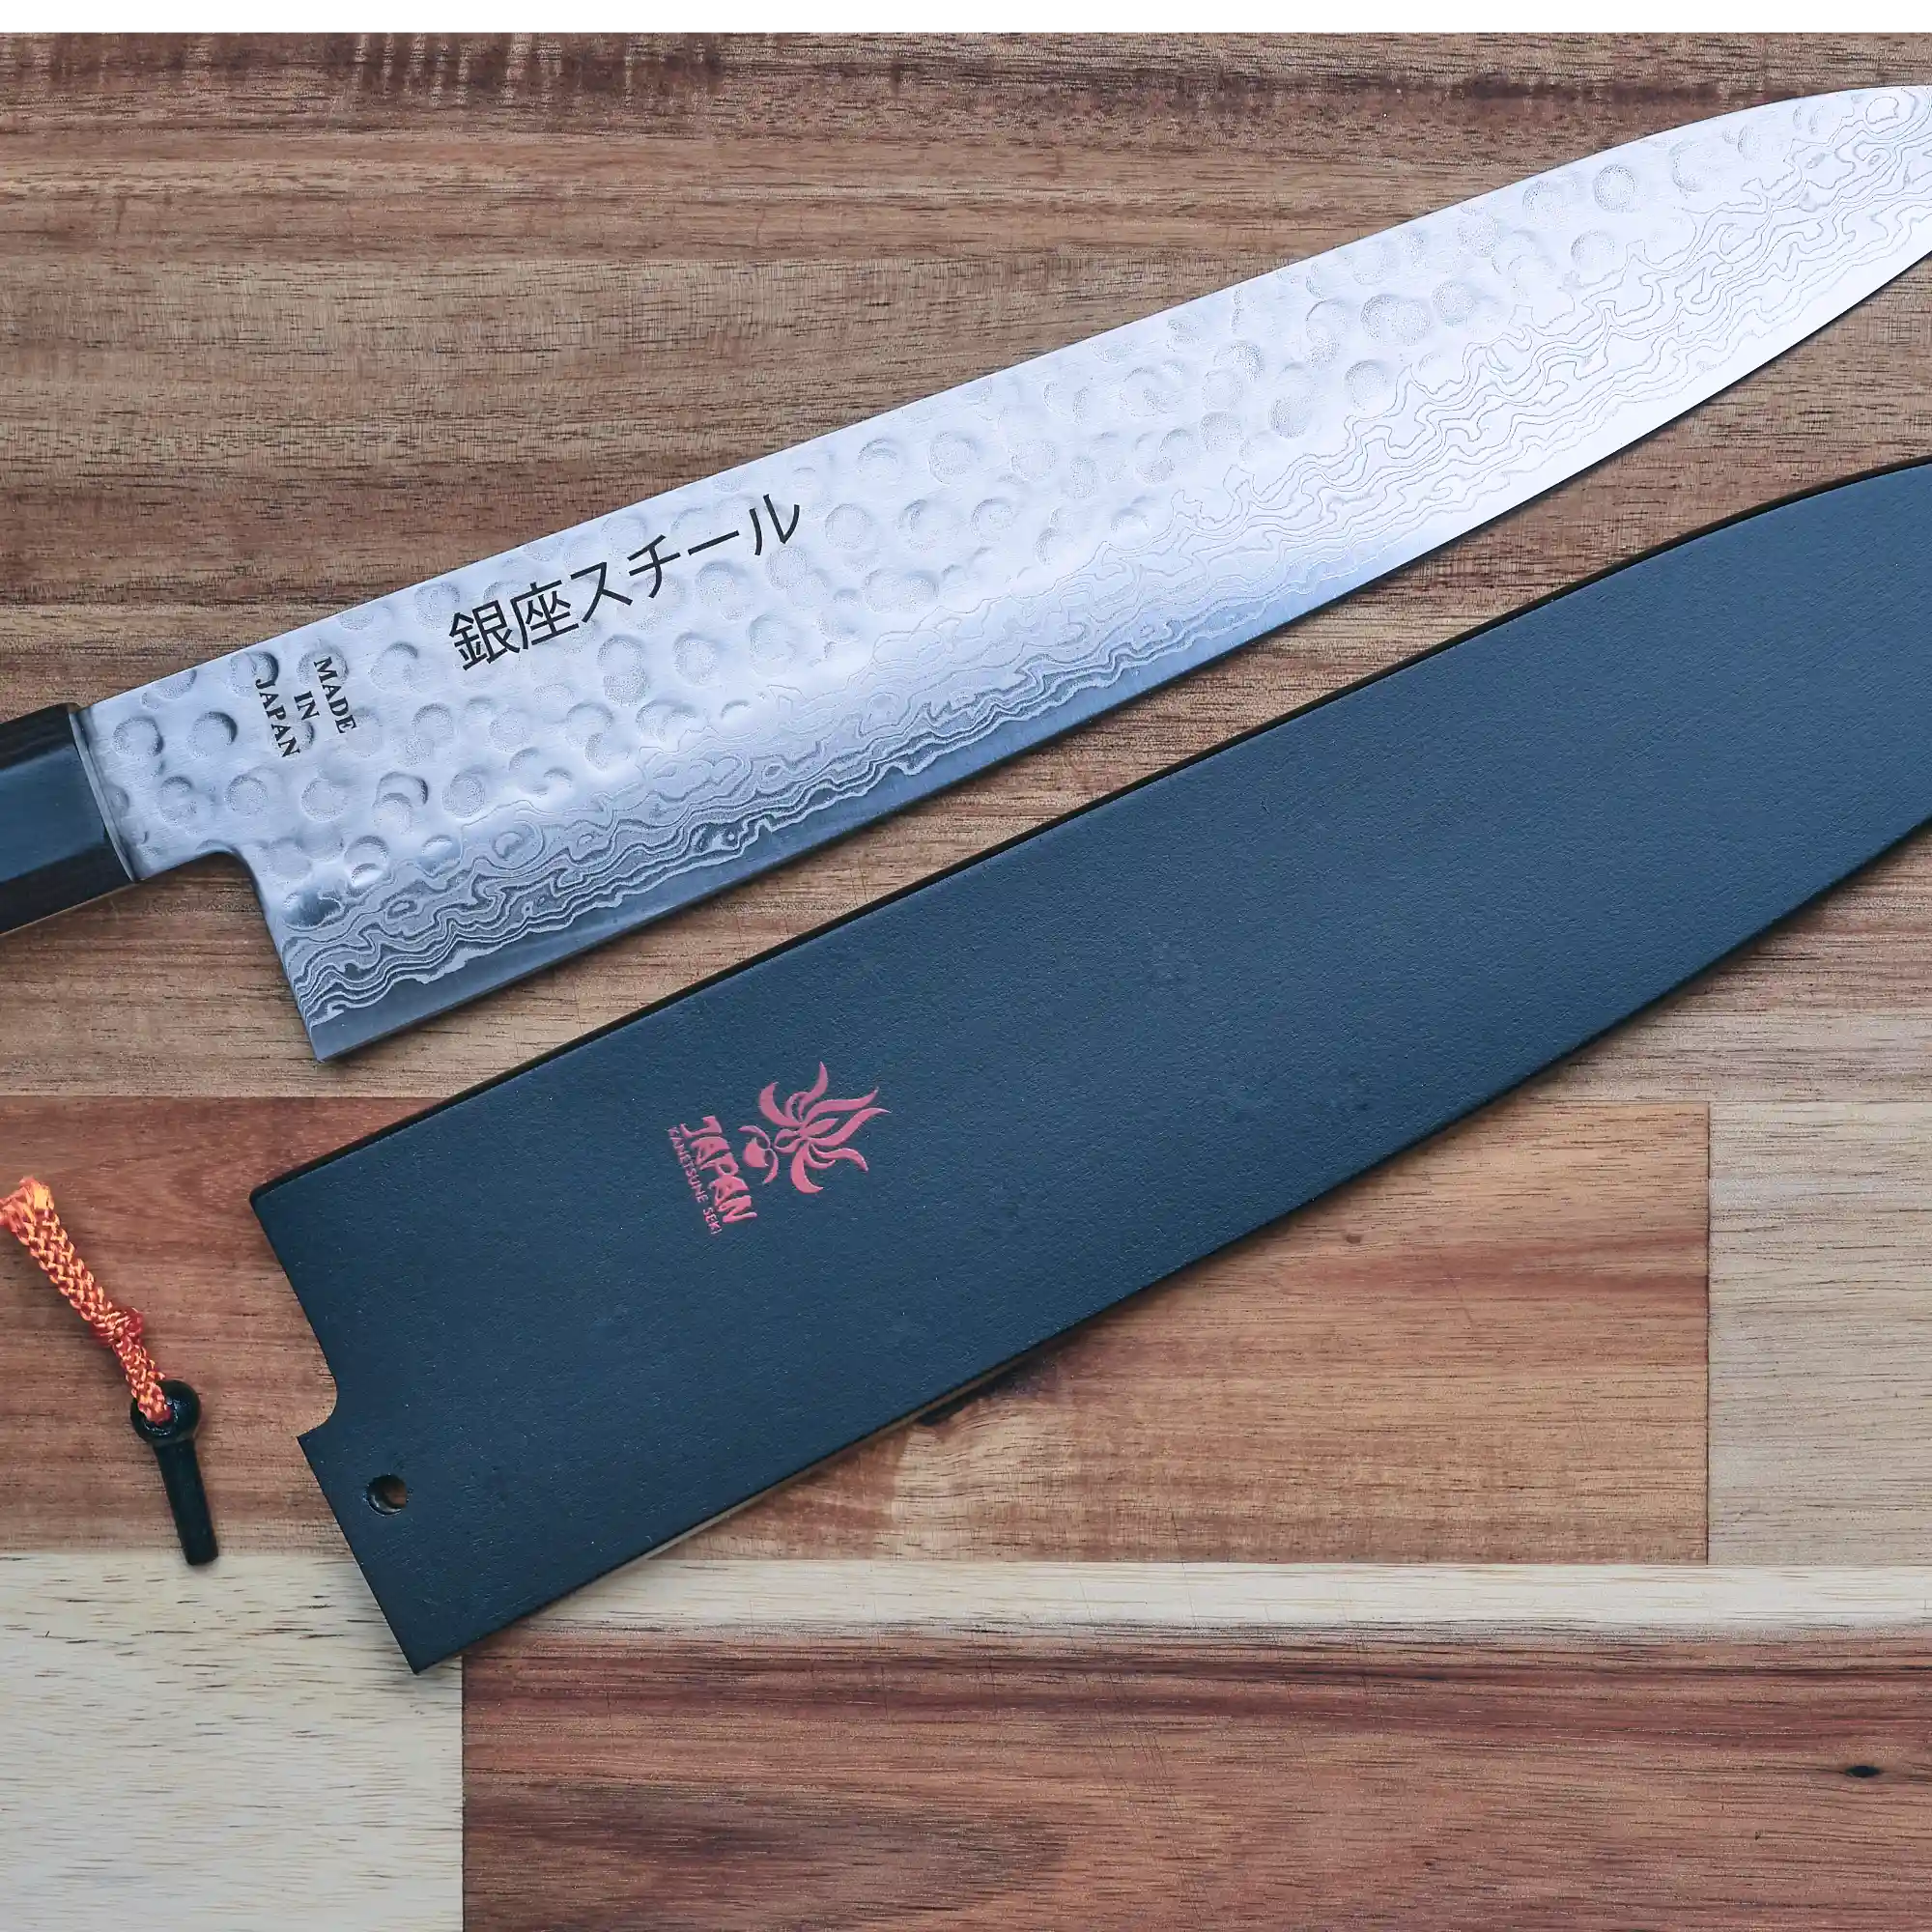 The Ultimate Guide to Knife Guards: Protecting Your Precious Blades